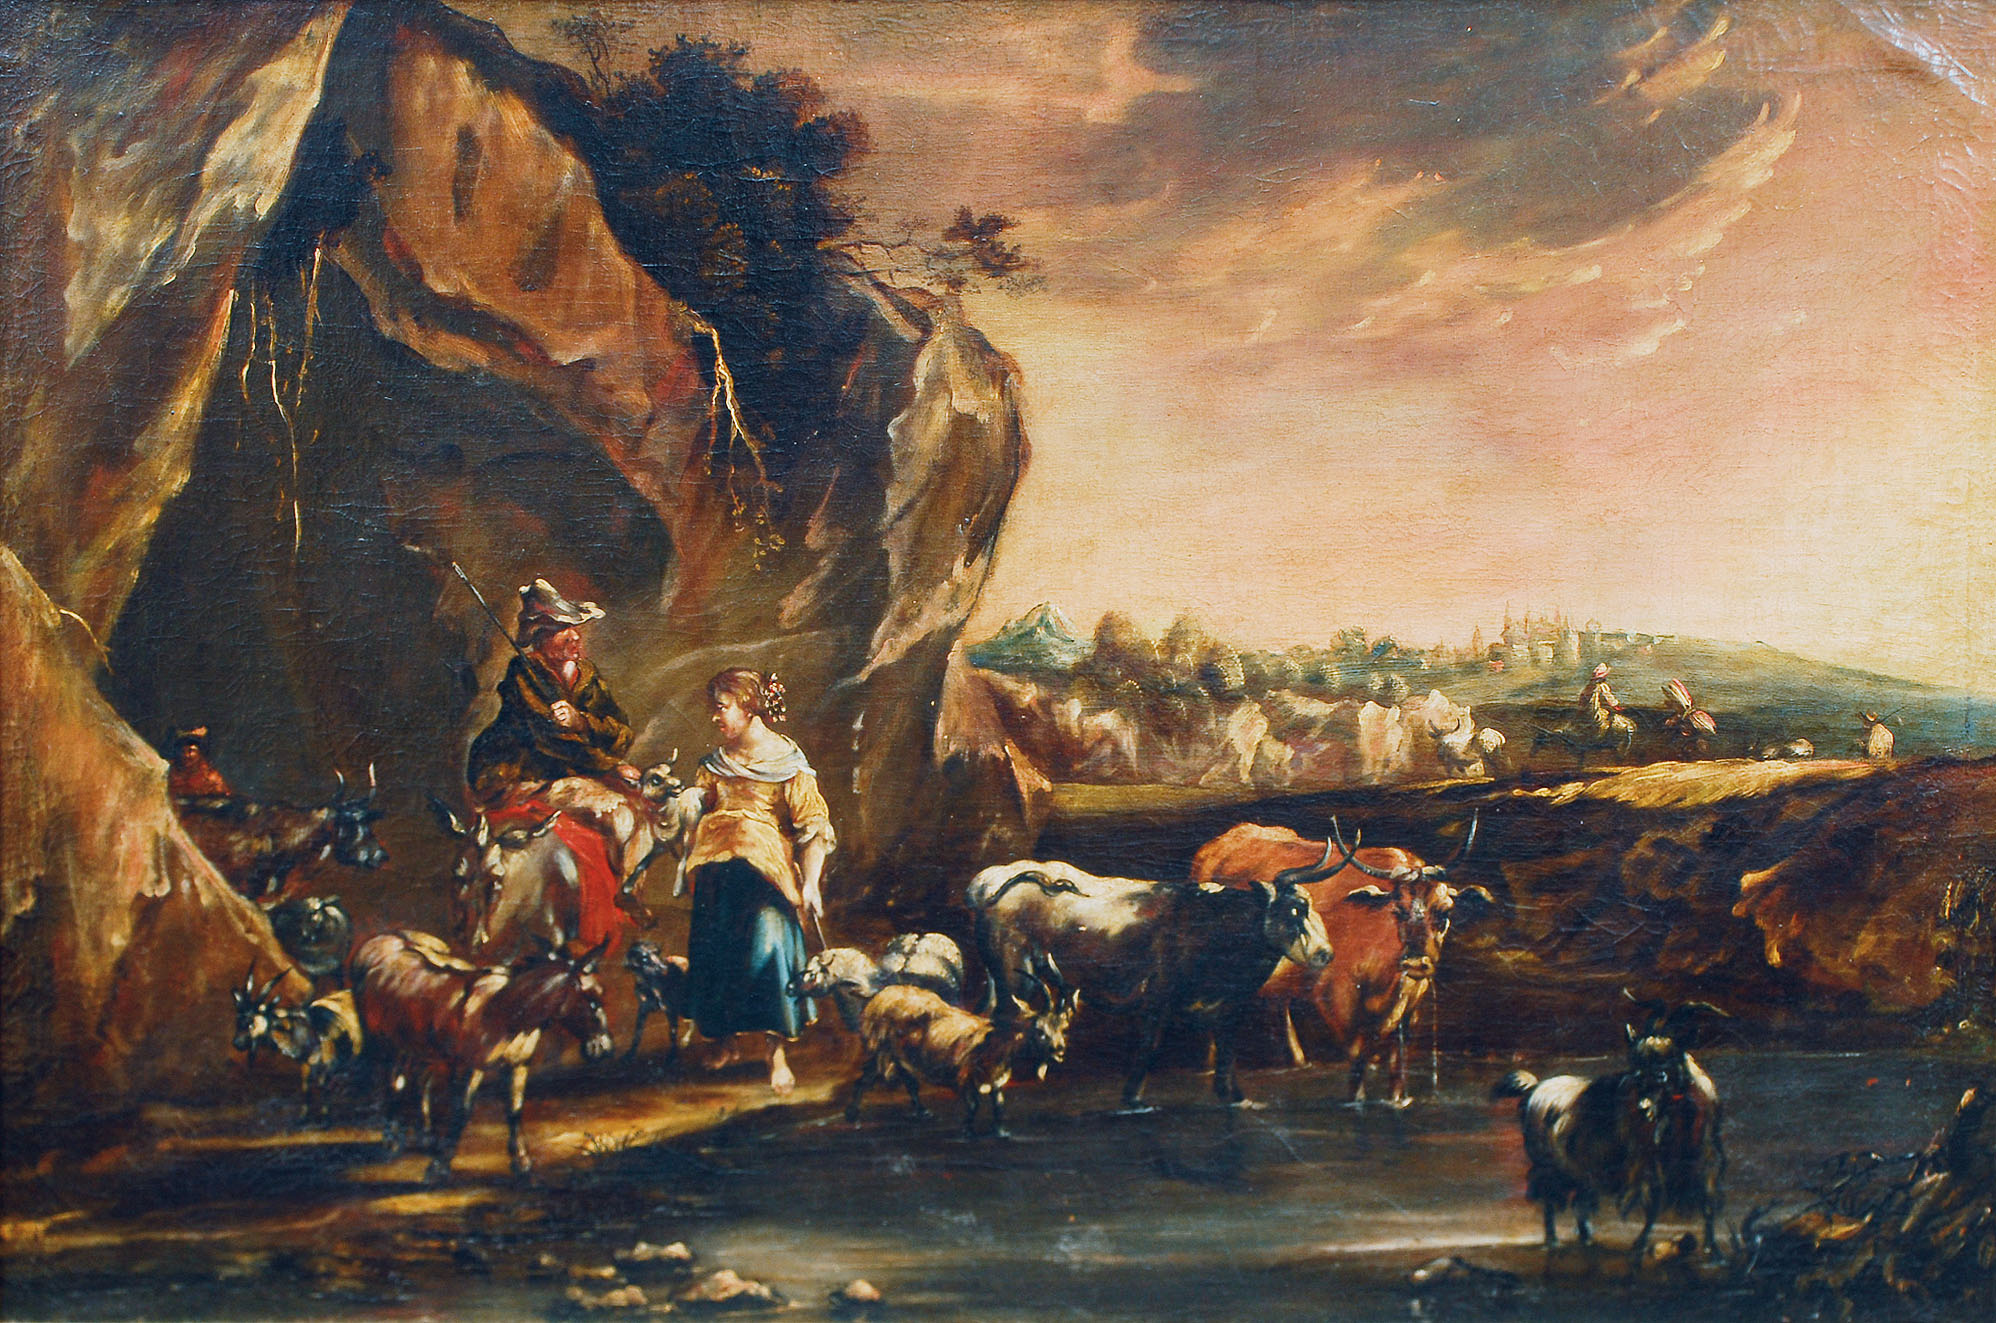 Shepherds with their flock at a watering place